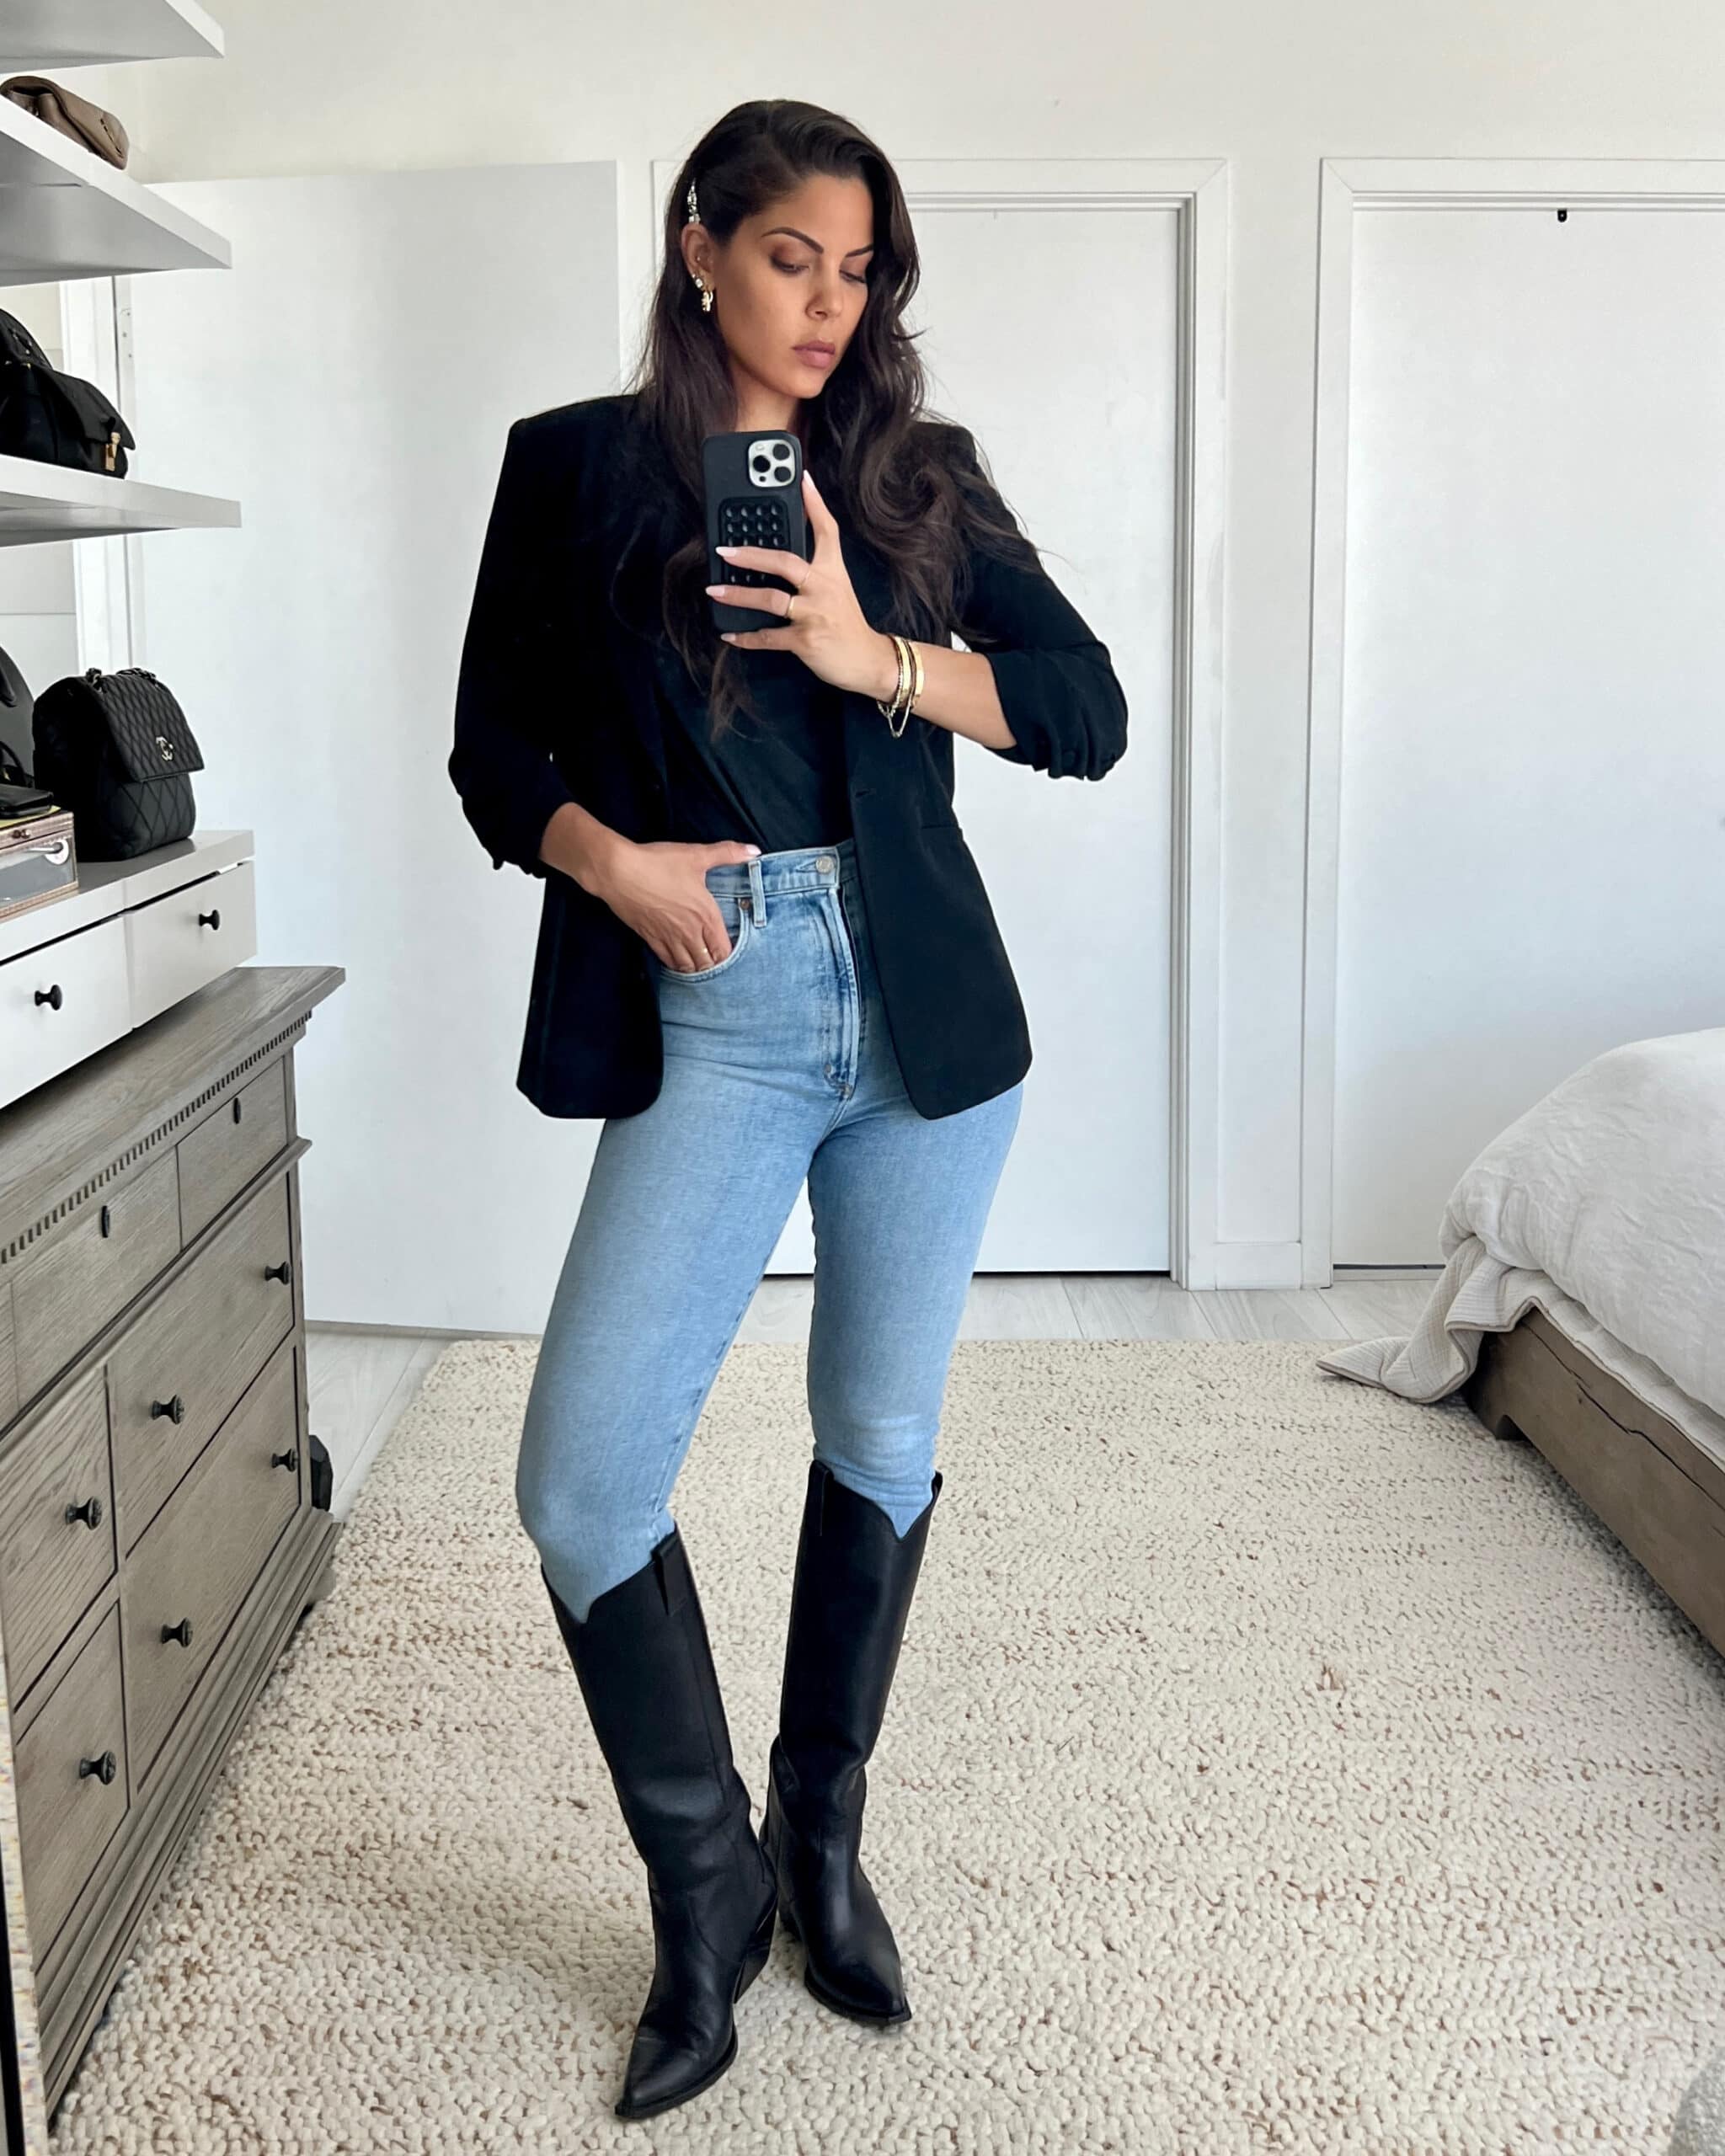 Jeans with Cowboy Boots Outfits For Women (4 ideas & outfits)